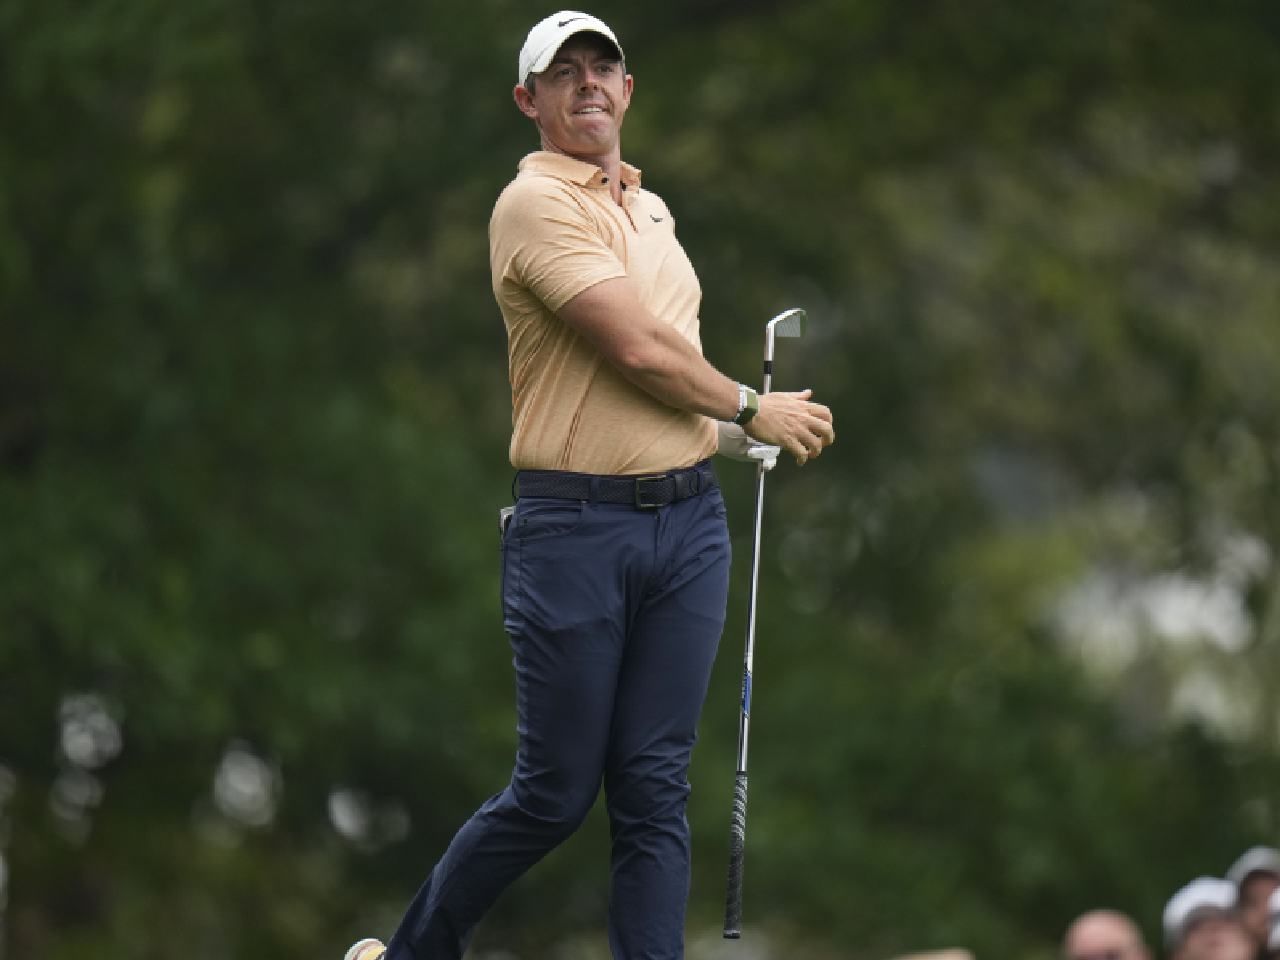 McIlroy, Koepka bow to Masters history; bury the hatchet and come together for practice